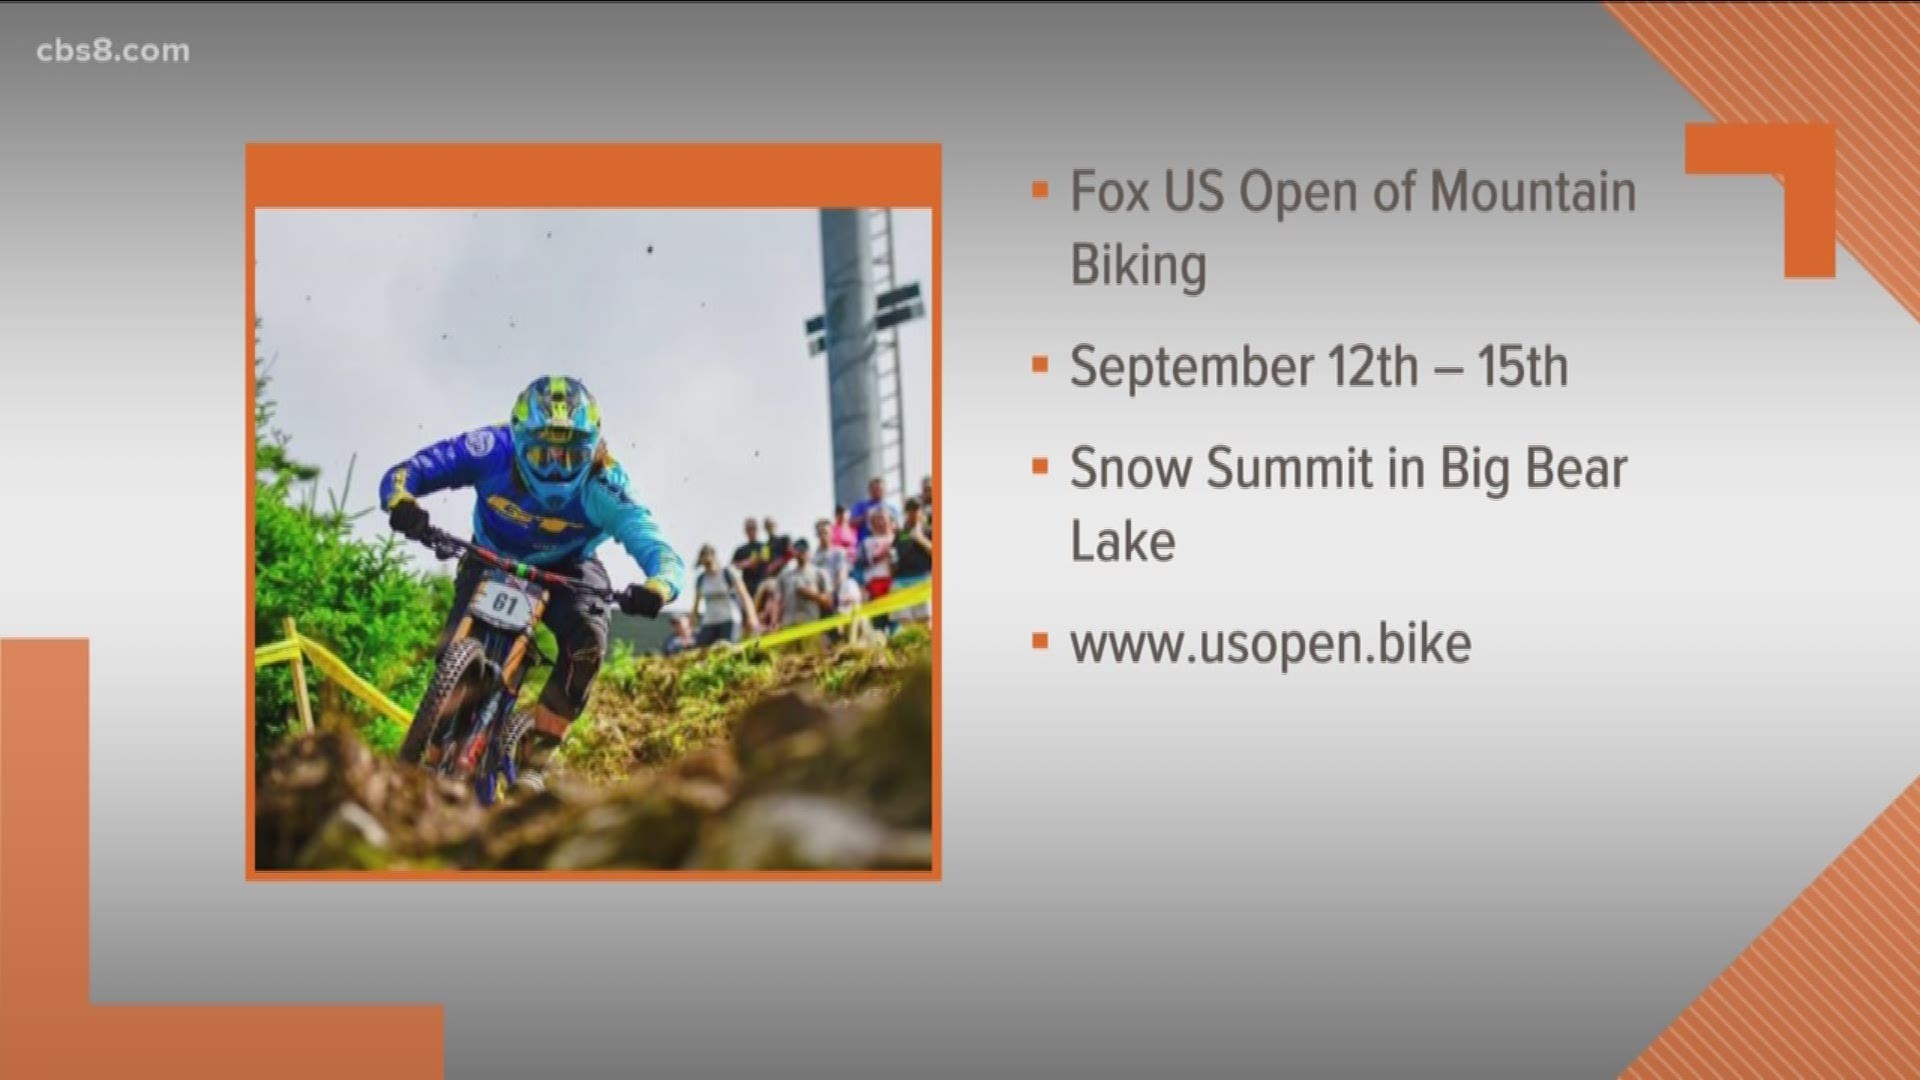 Like a big mountain bike party, the bike park is open to the public at Big Bear Lake on September 12-15